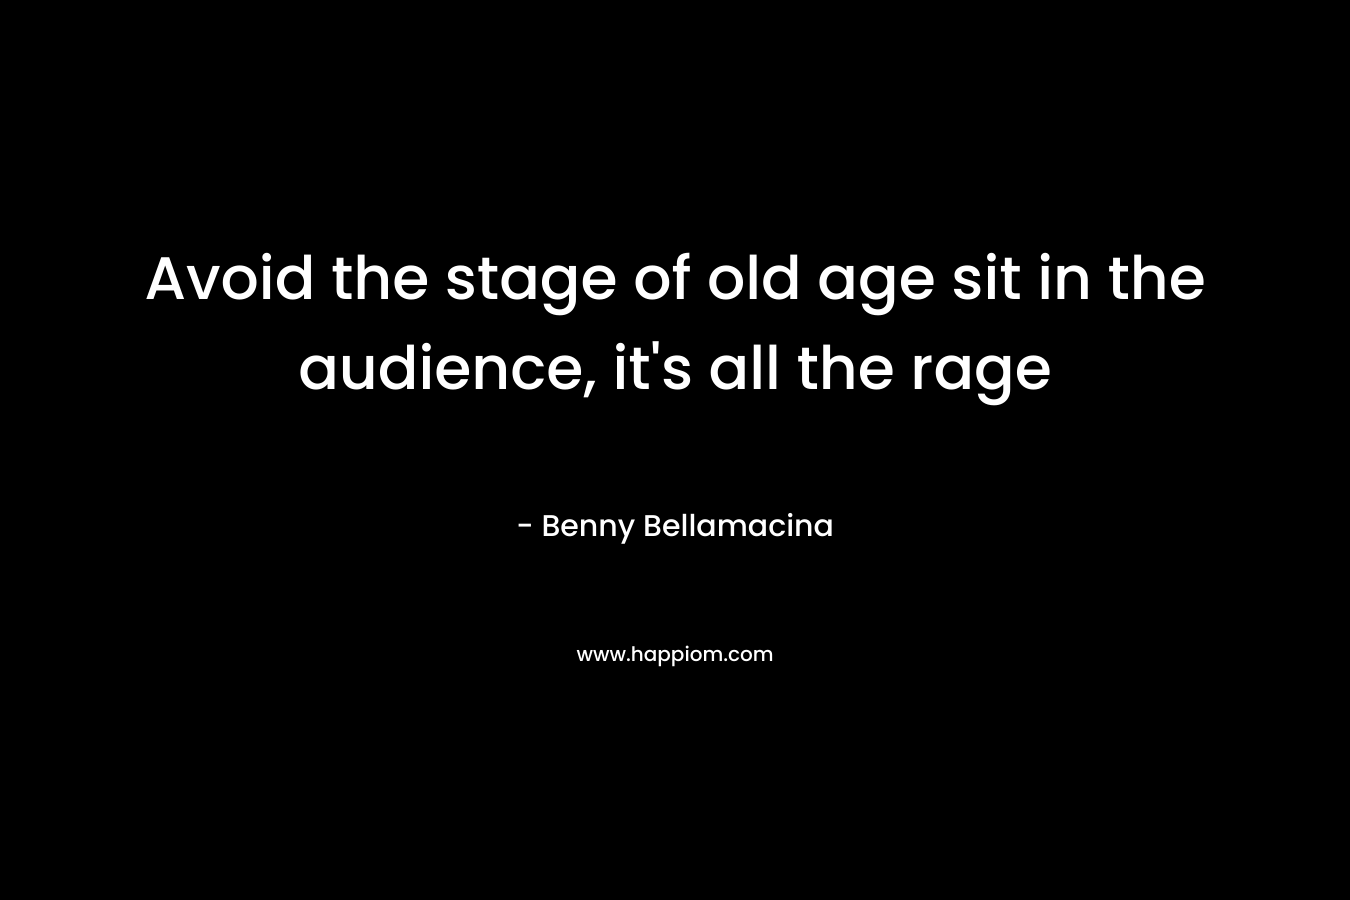 Avoid the stage of old age sit in the audience, it's all the rage